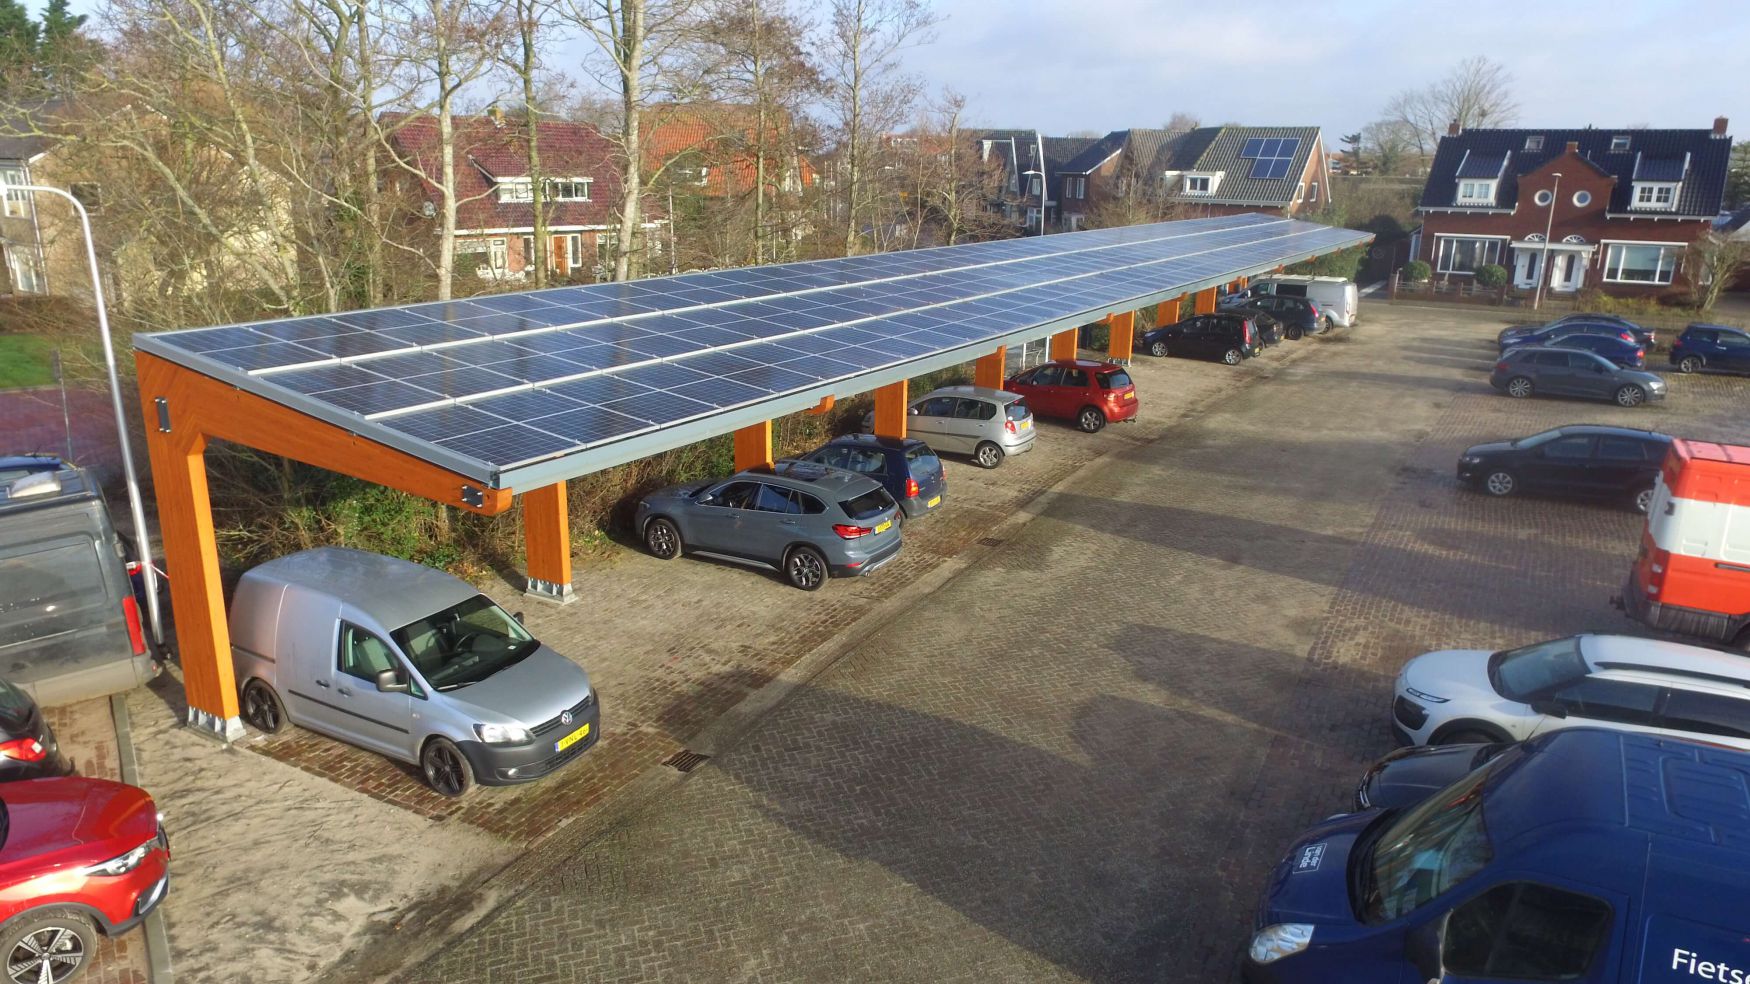 Project: Texel - 50 kWp